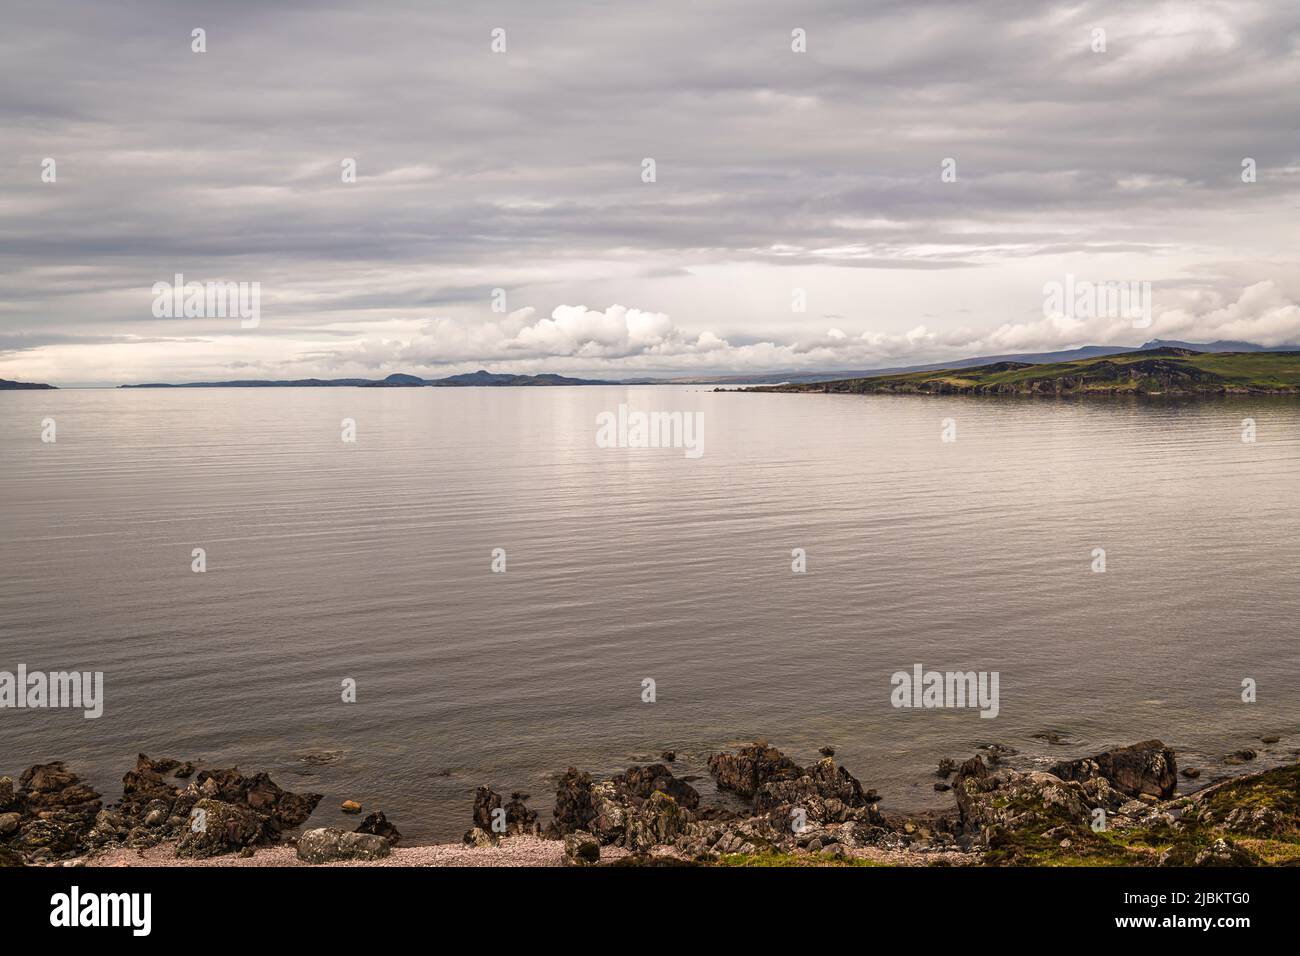 A cloudy, summer, seascape HDR image of First Coast, Gruinard Bay in the Northwest highlands of Scotland. 23 May 2022 Stock Photo